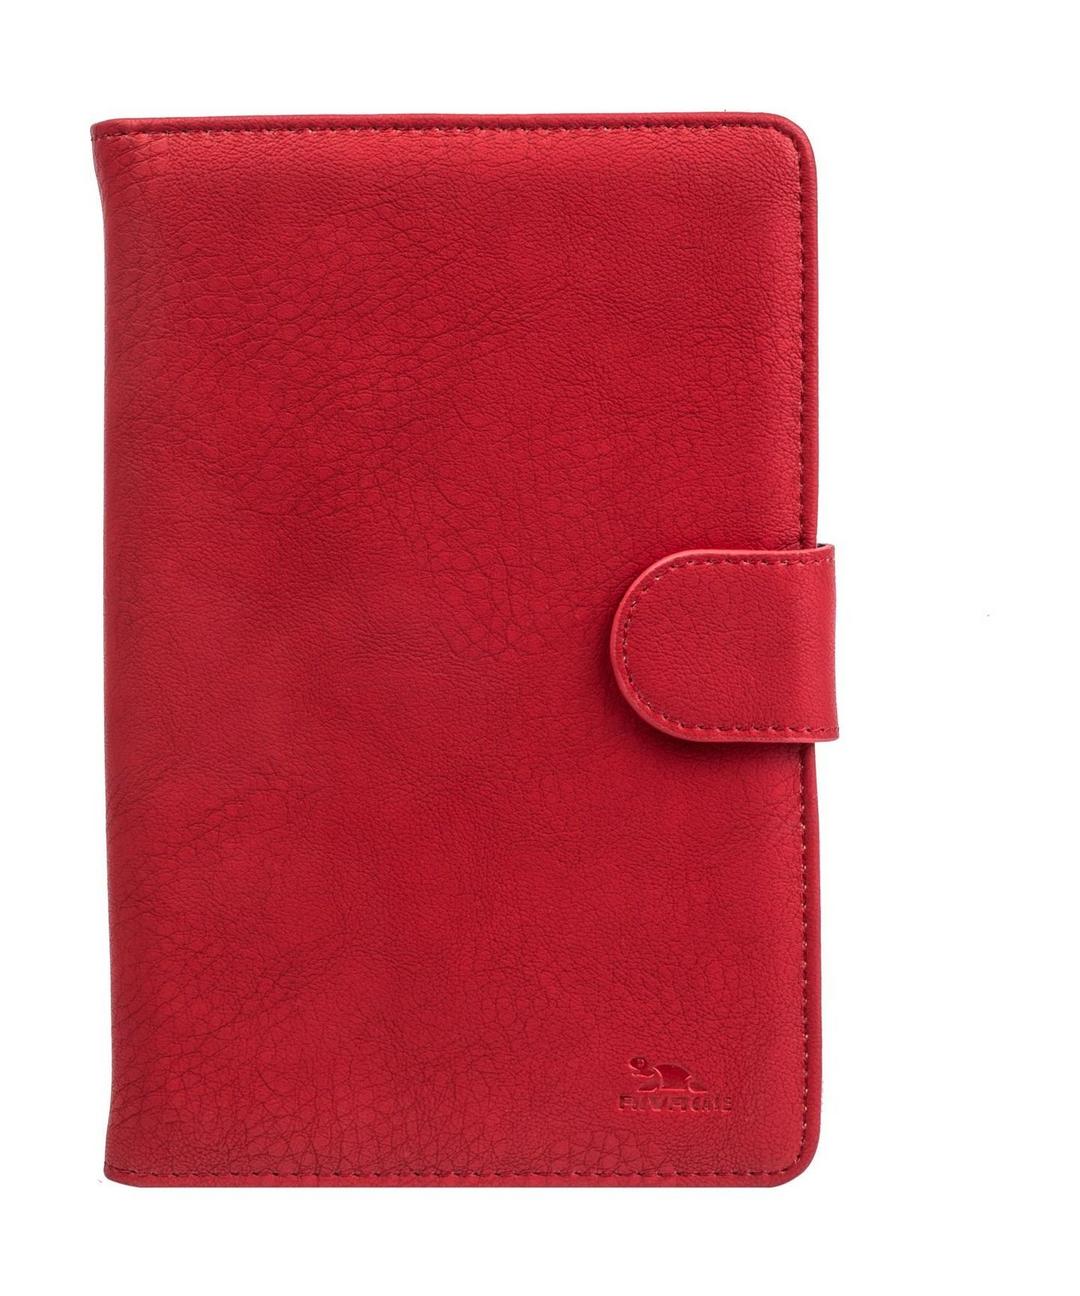 RivaCase Protective Case for 10 inch Tablet (3017) - Red